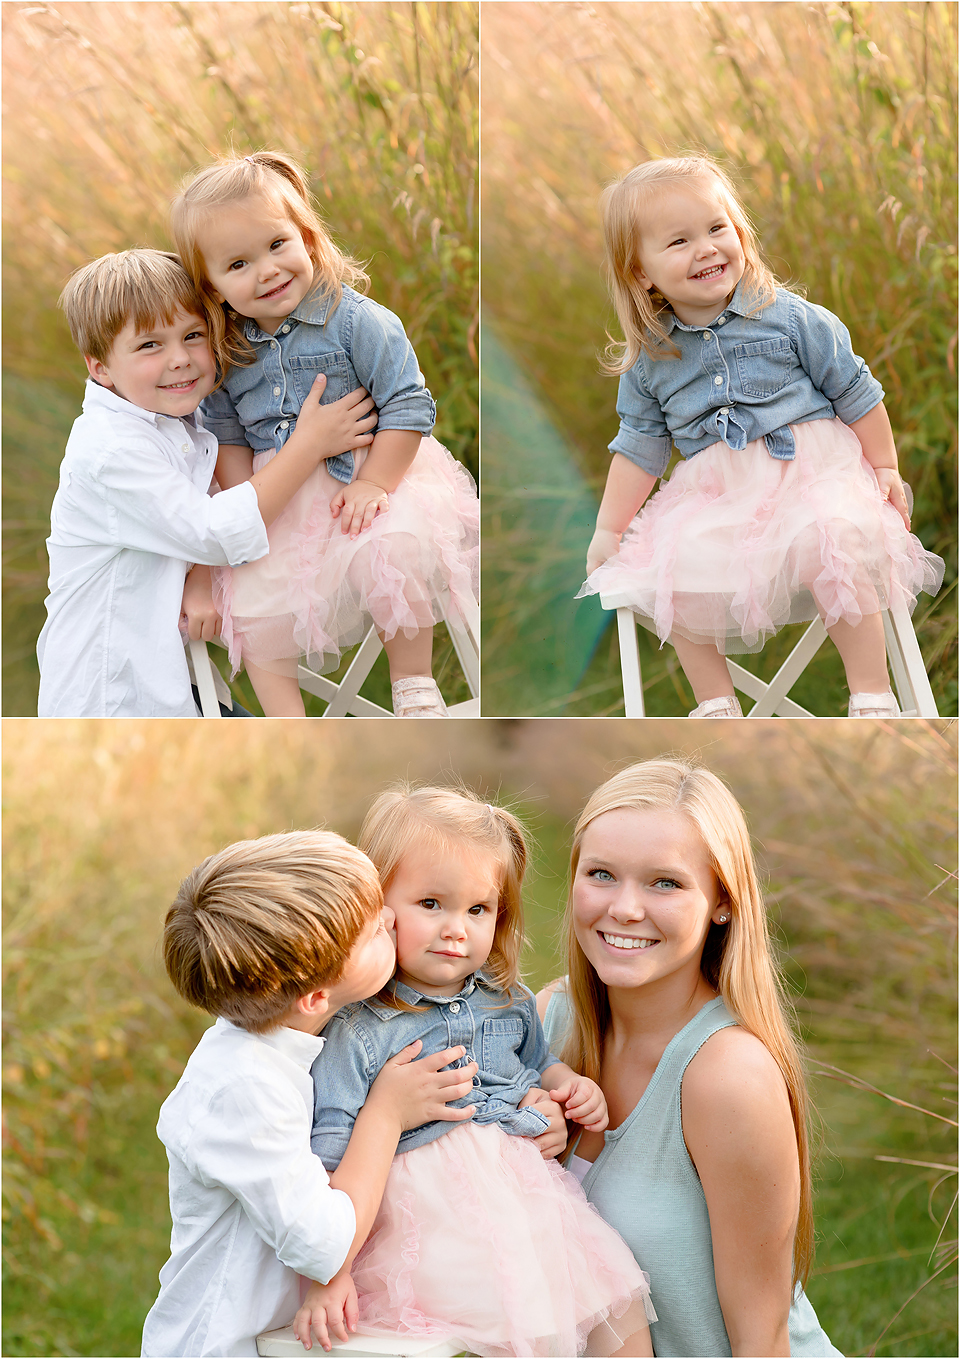 Fall Mini Sessions Are Here | CT Family Photographer ...